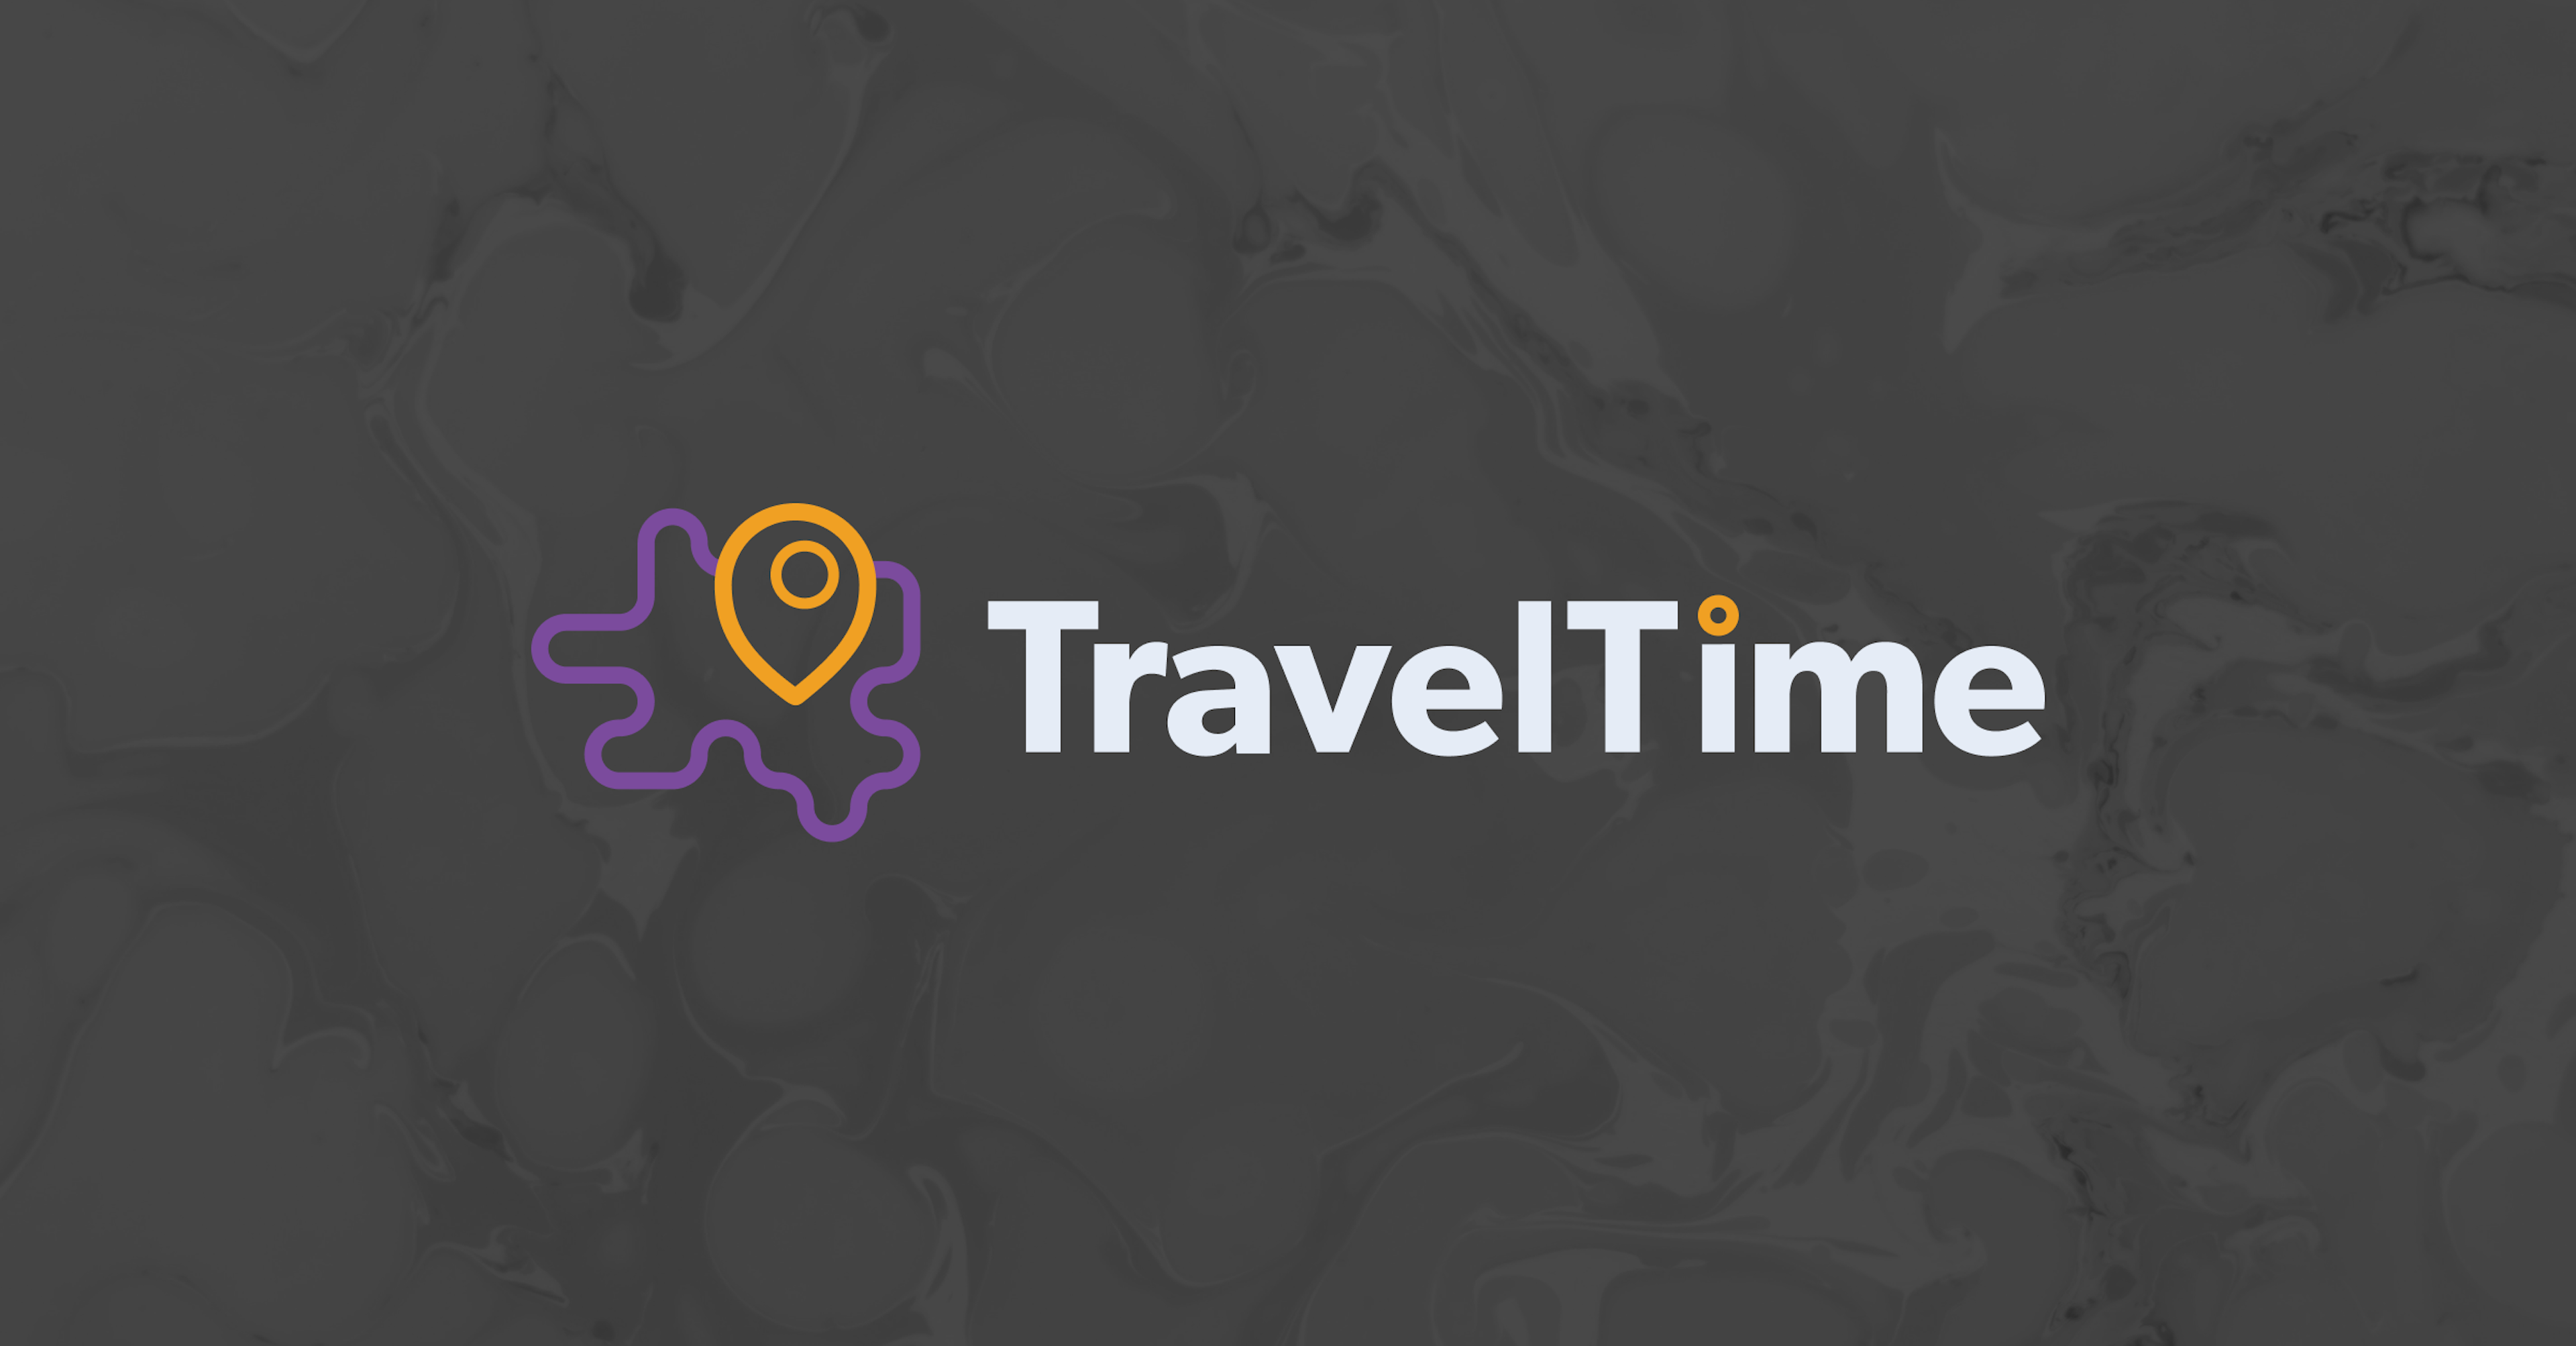 Working at TravelTime: Change the Way We Search the World